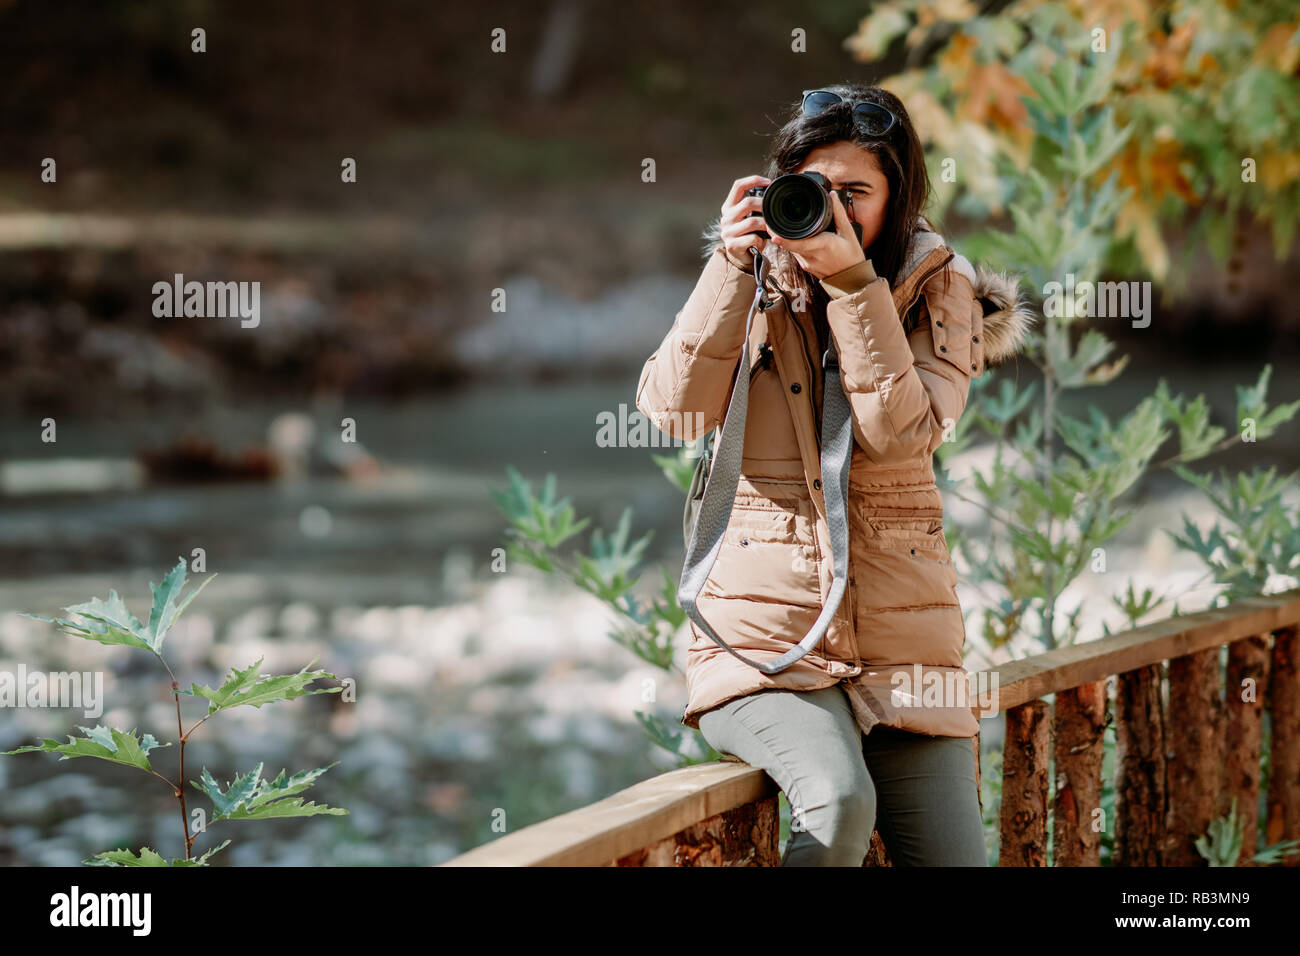 Nature Photographer taking pictures outdoors during trekking trip Stock Photo